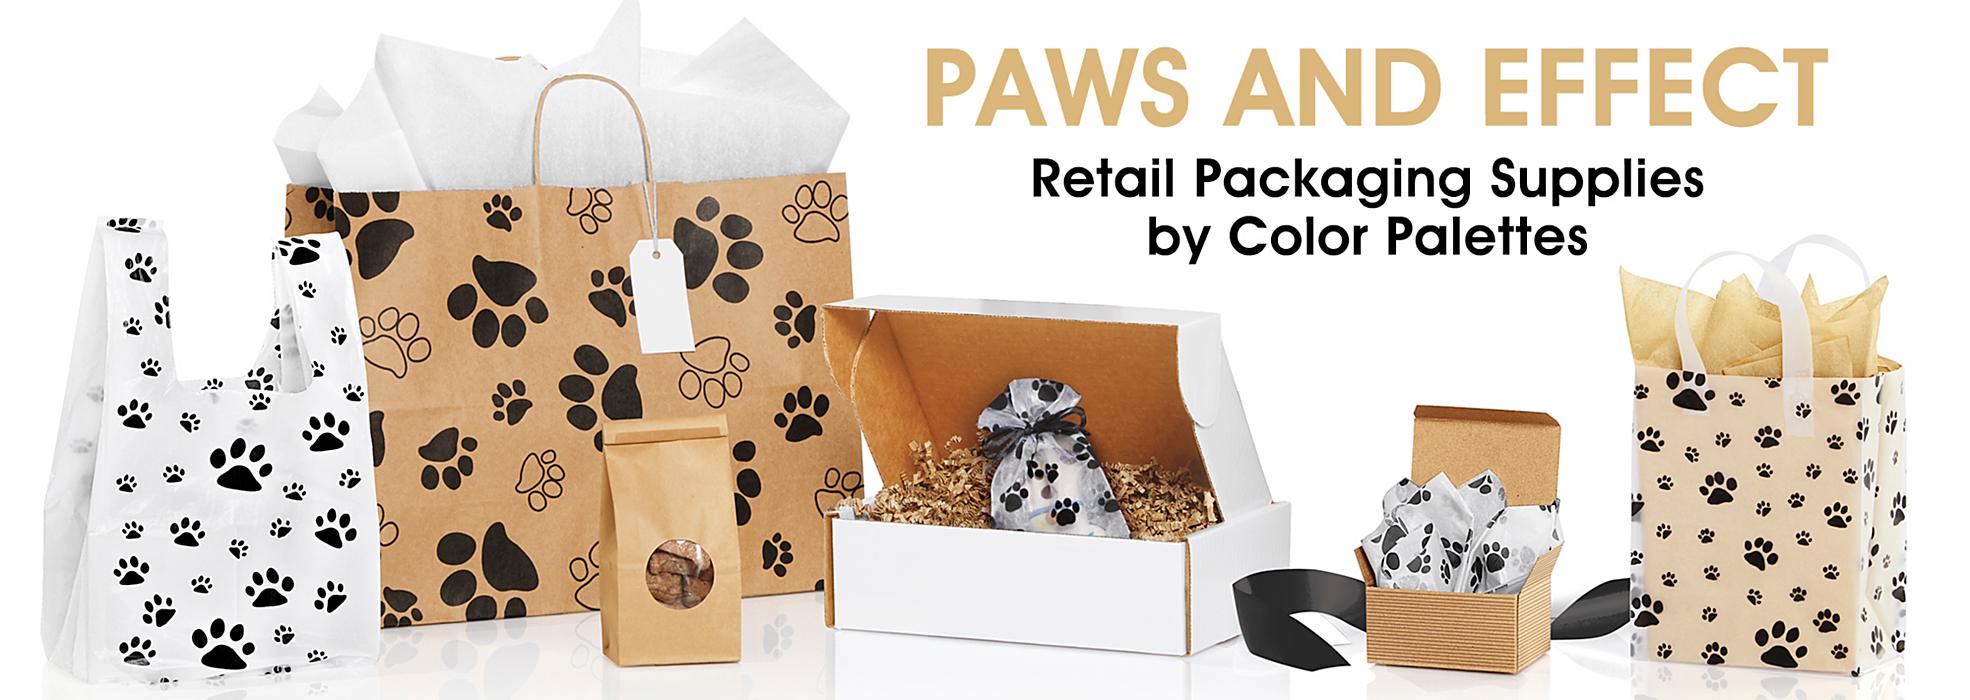 Paws And Effect - Retail Packaging Supplies by Color Palettes